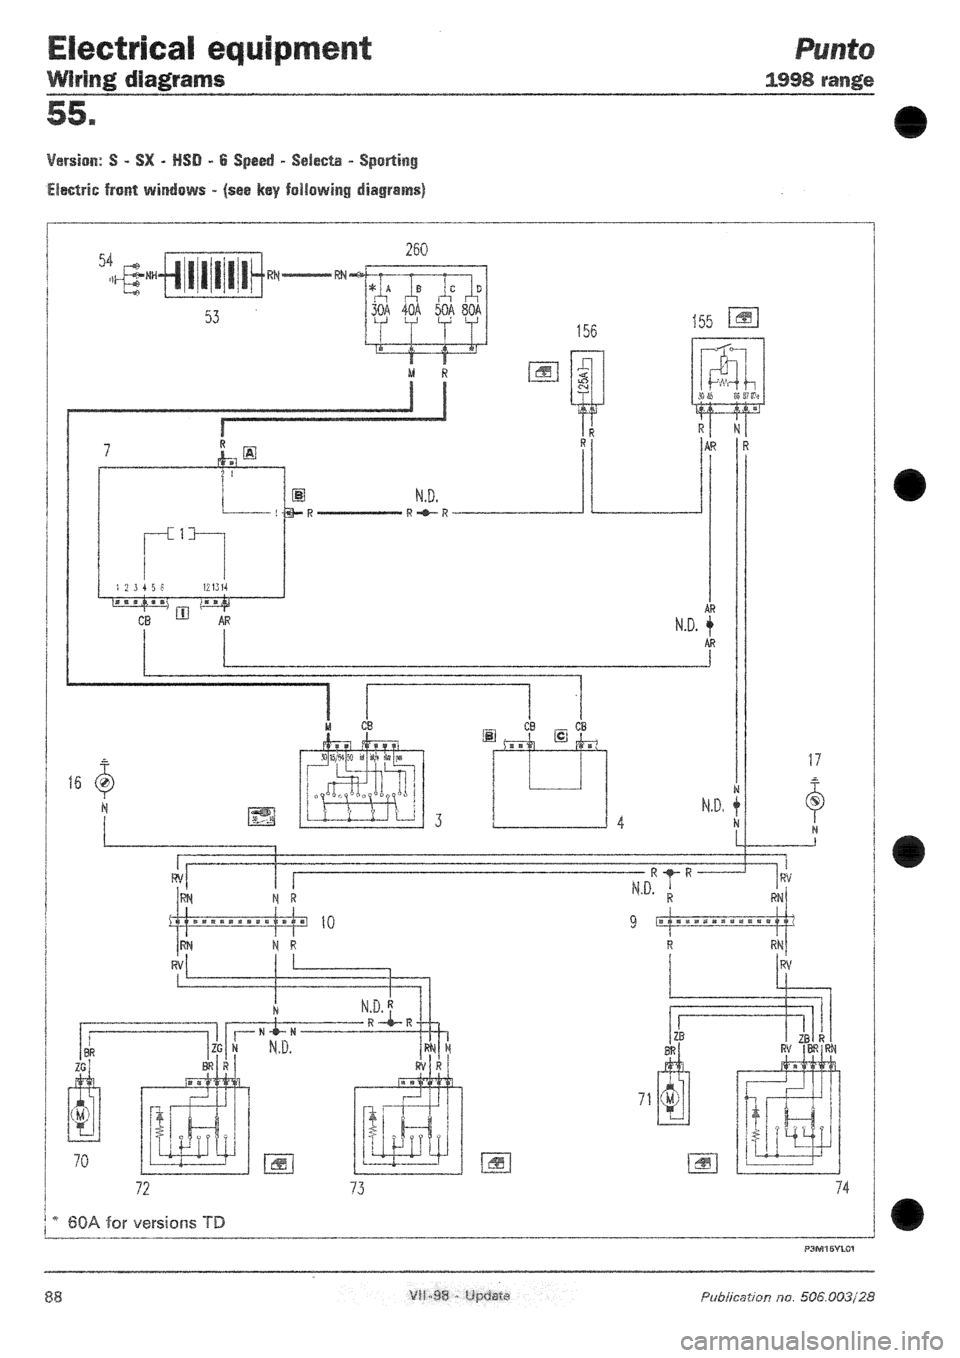 FIAT PUNTO 1998 176 / 1.G Wiring Diagrams Owner's Manual (49 Pages)